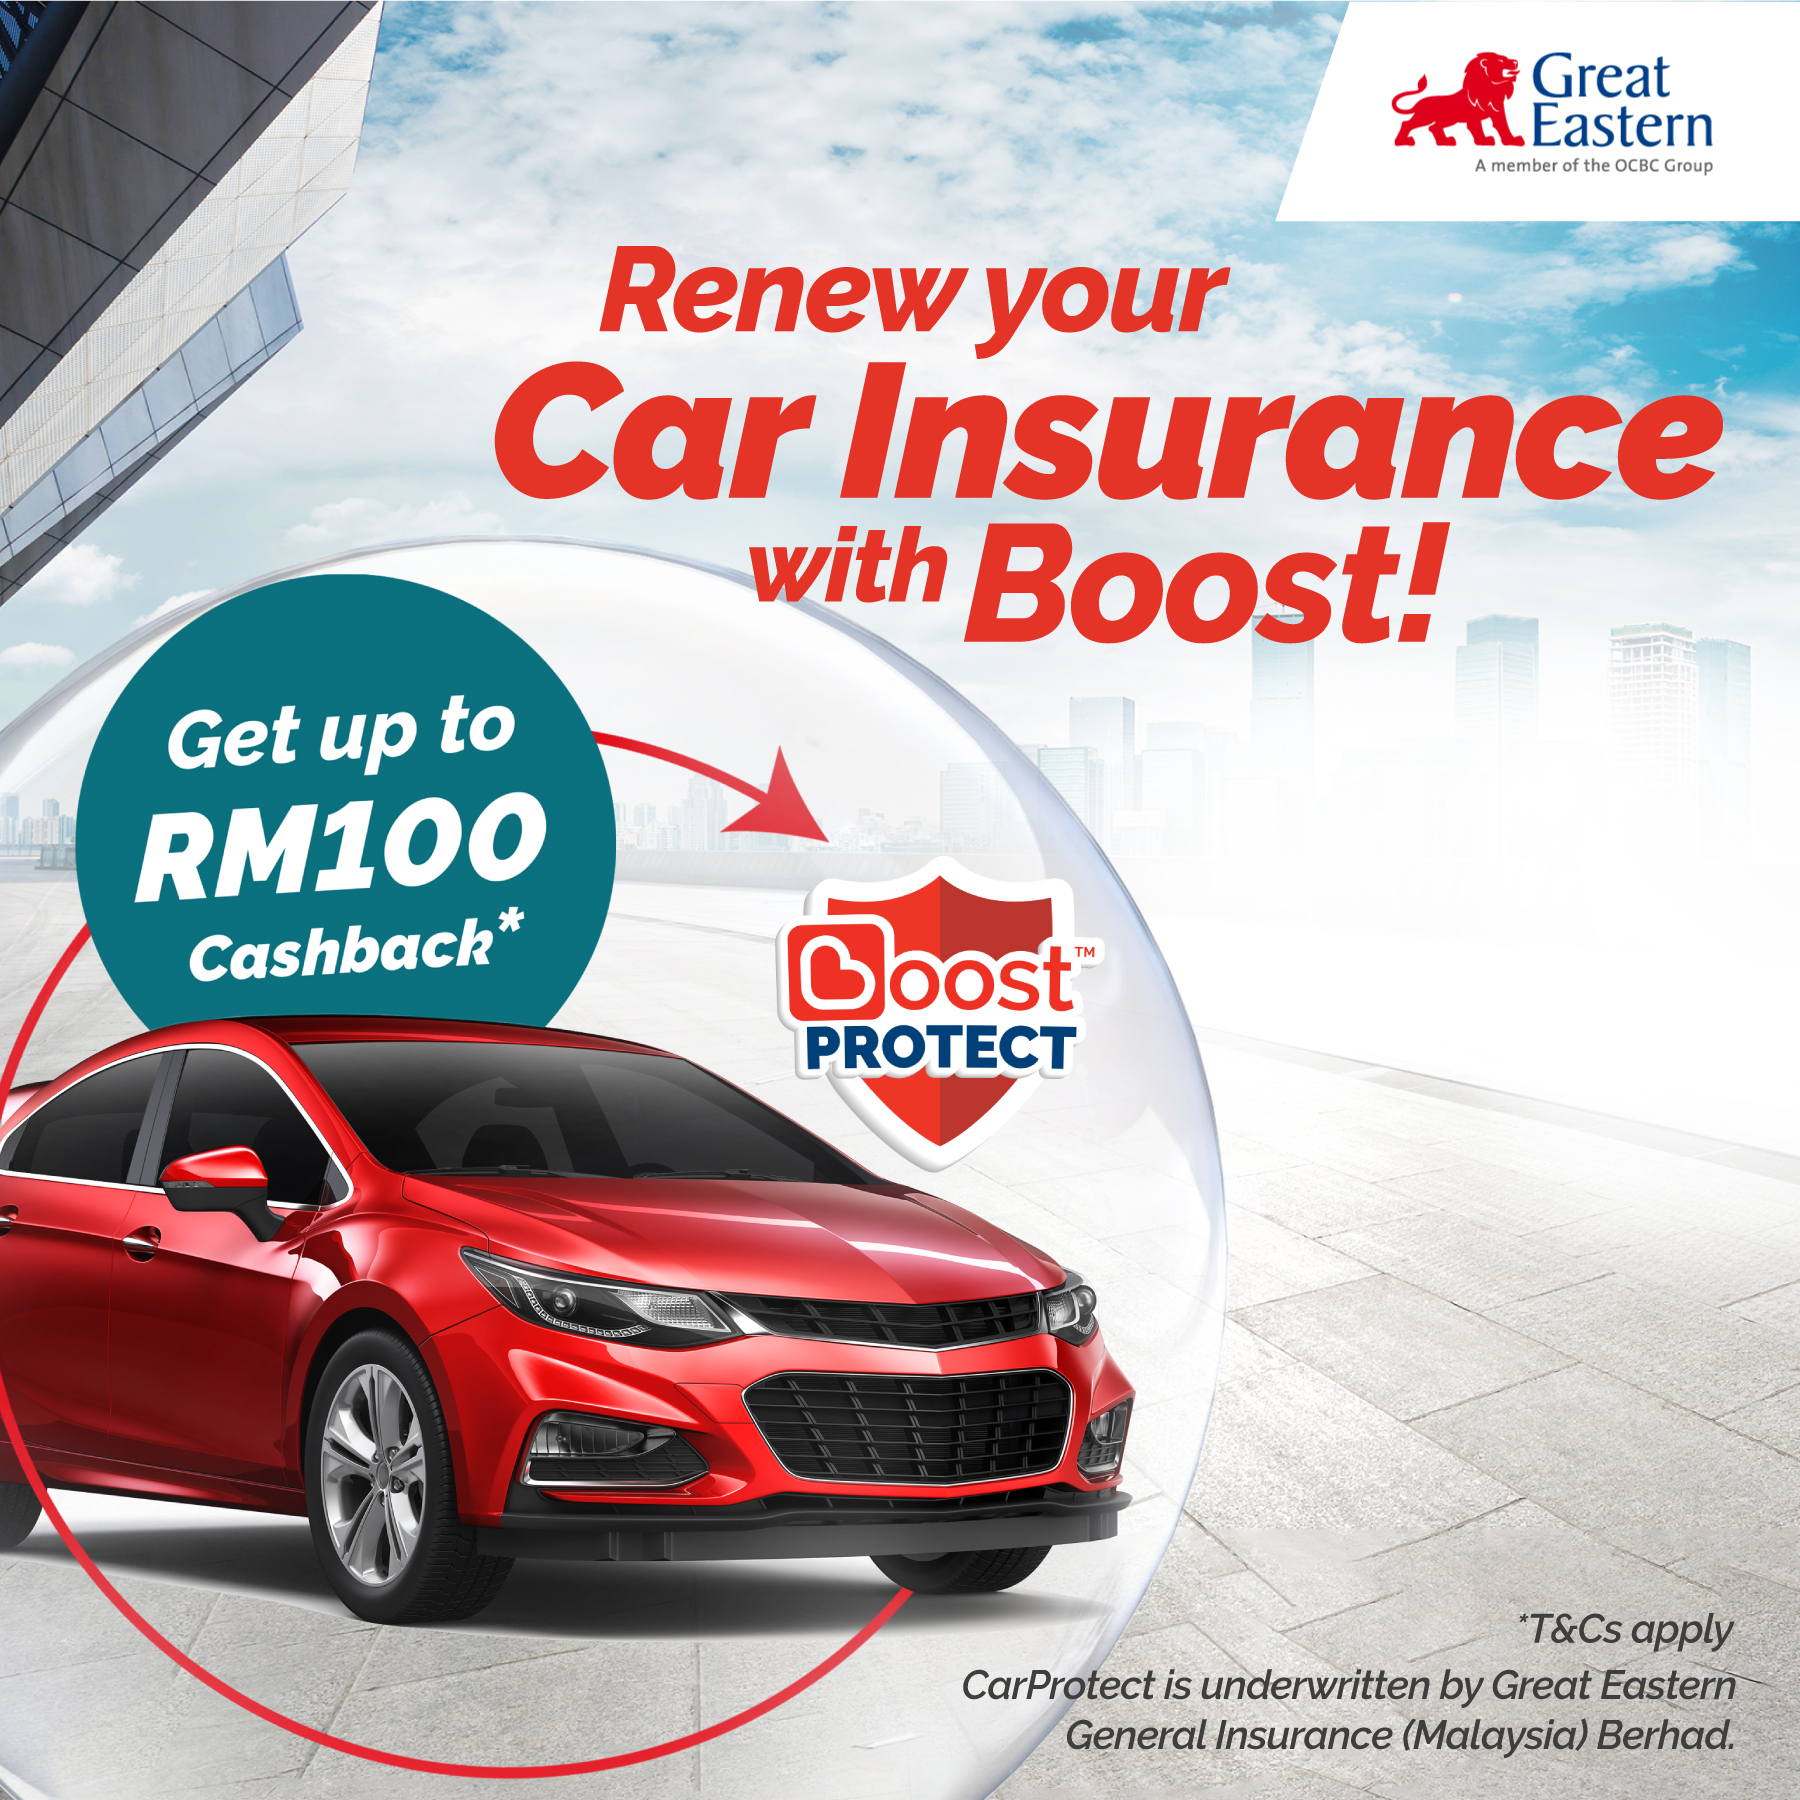 Boost introduces car insurance coverage in your pocket